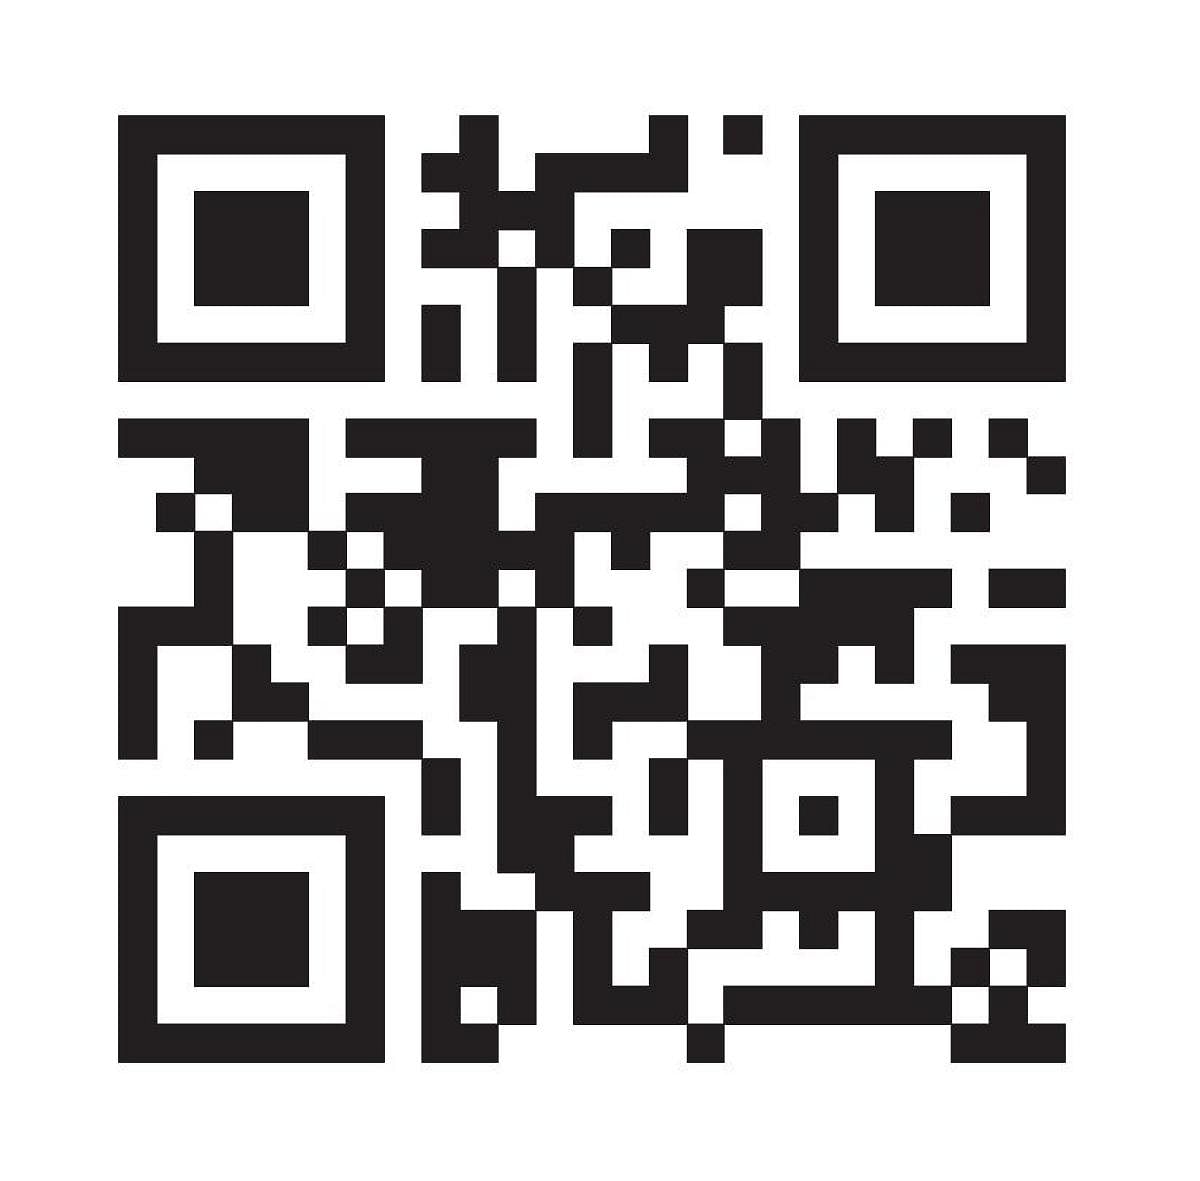 To register scan the QR code.